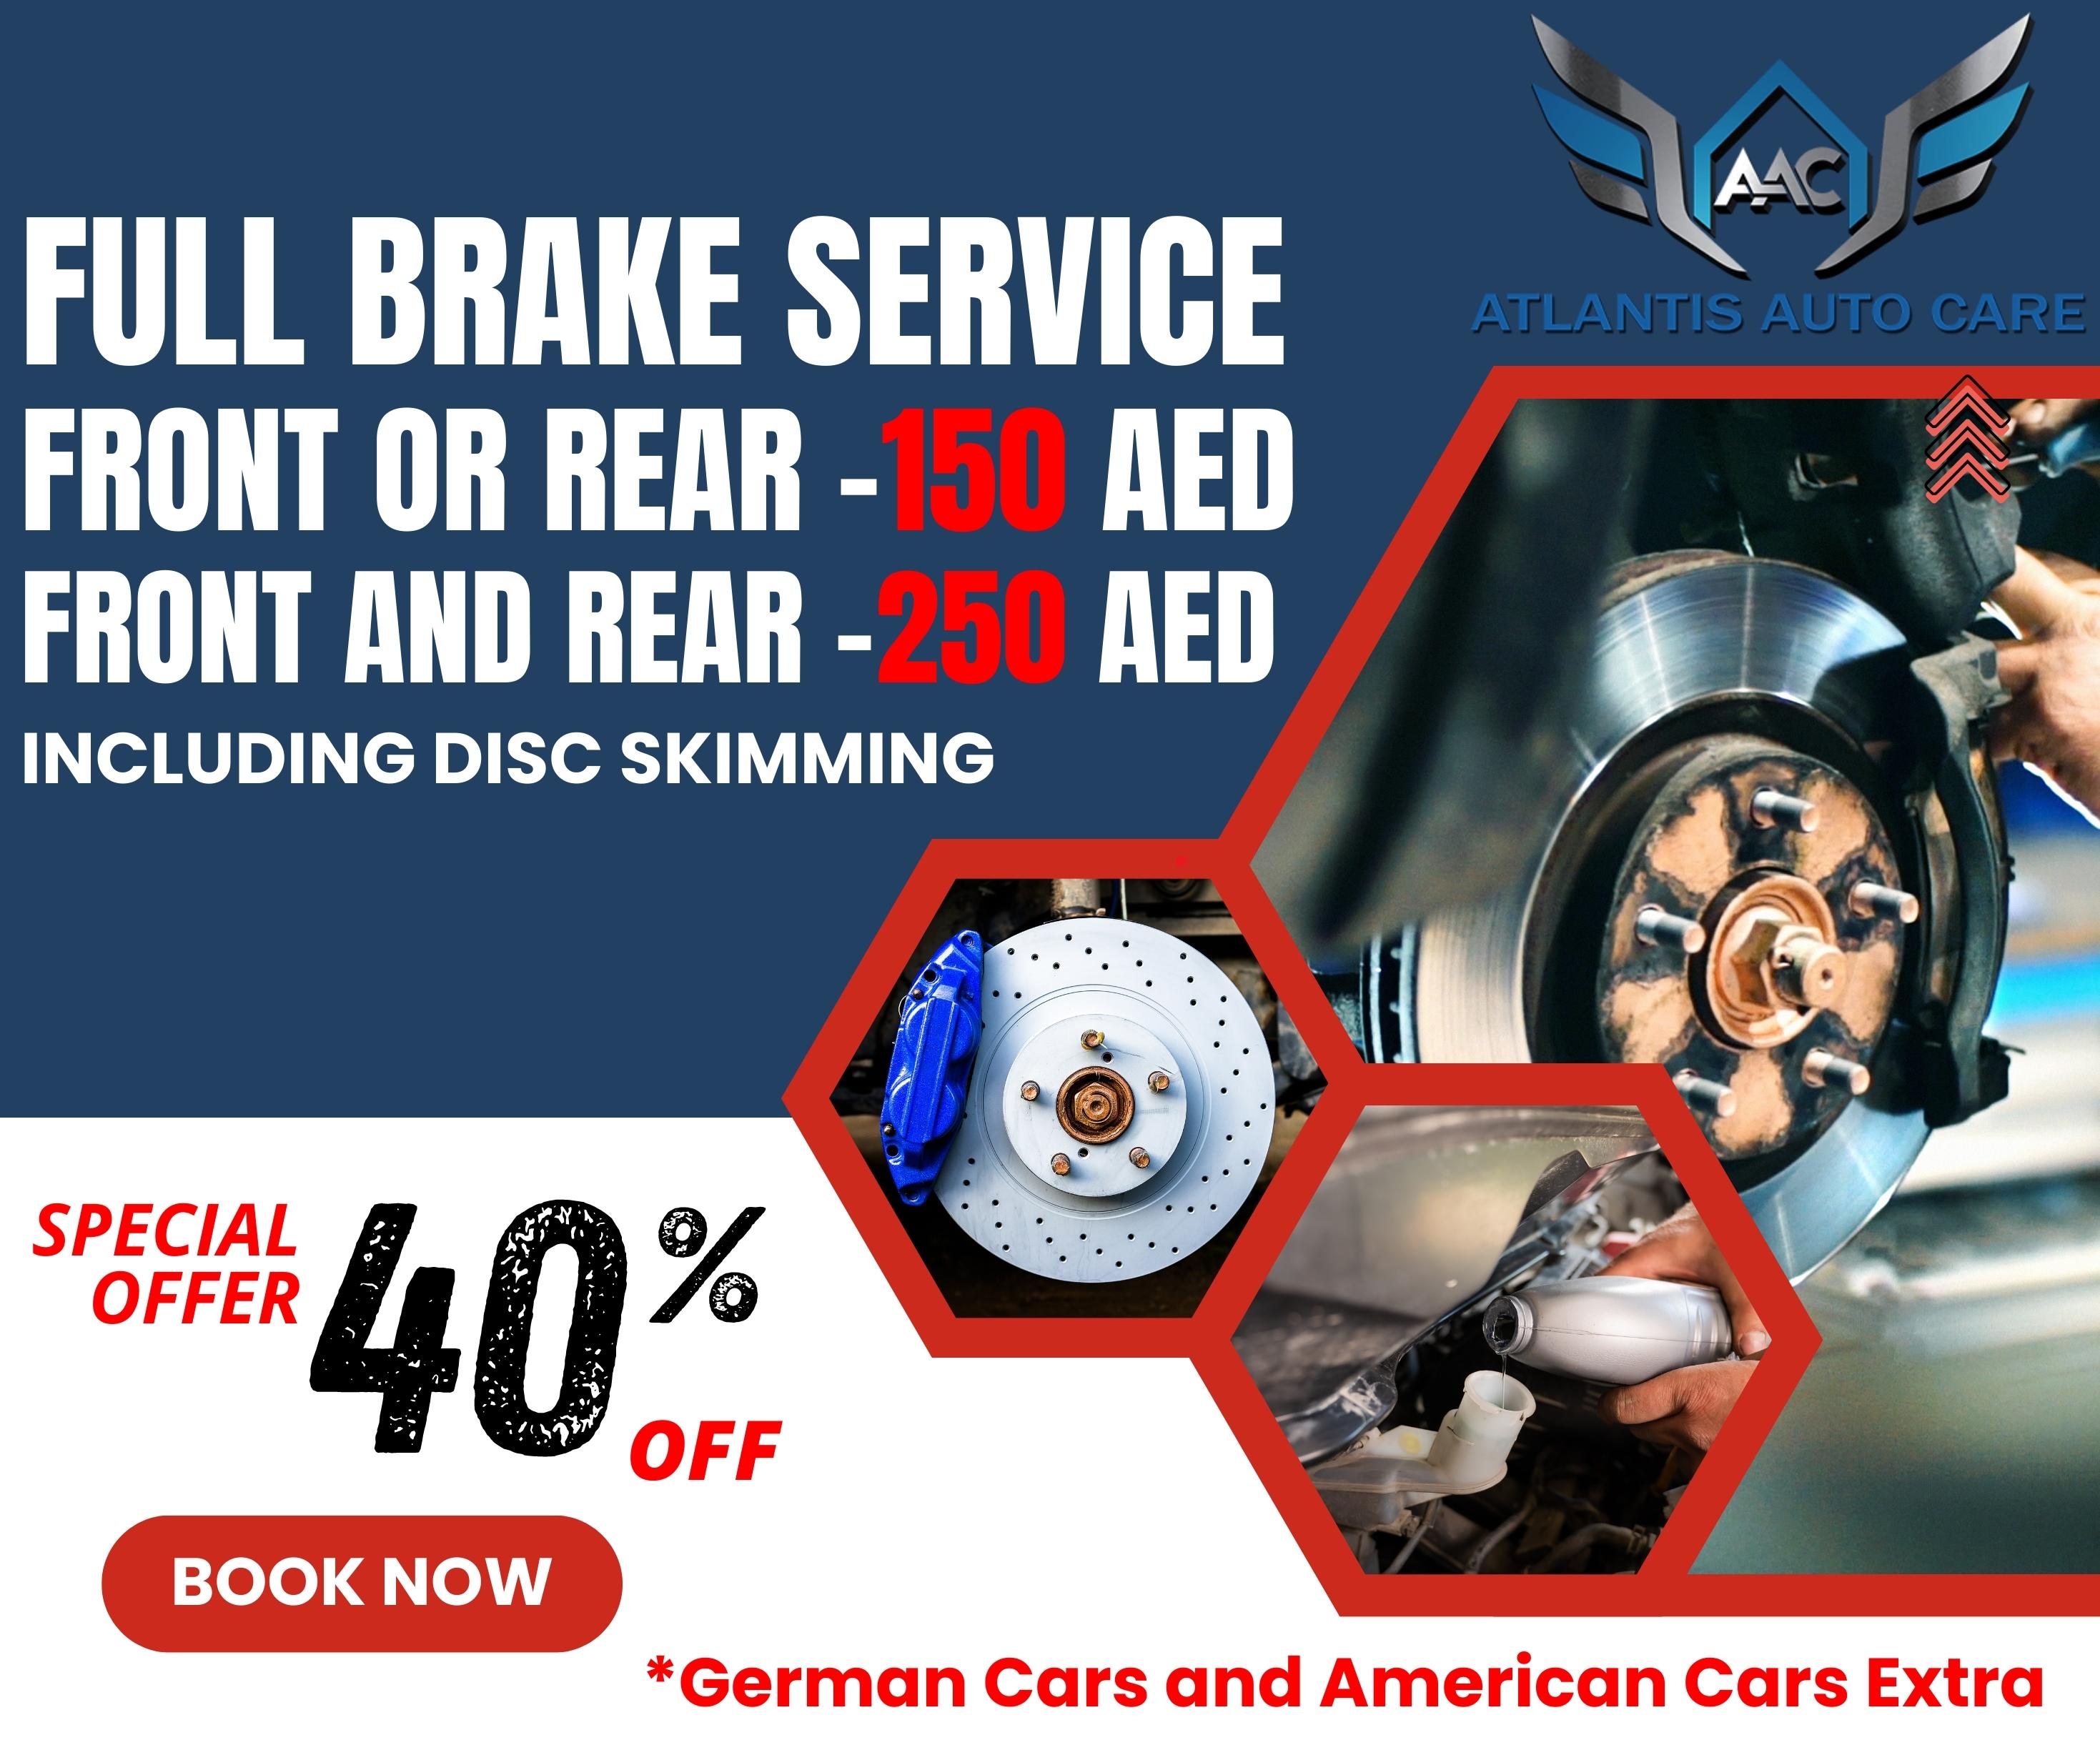 Full Brake Service Front Or Rear Now @150 AED Including Disc Skimming.